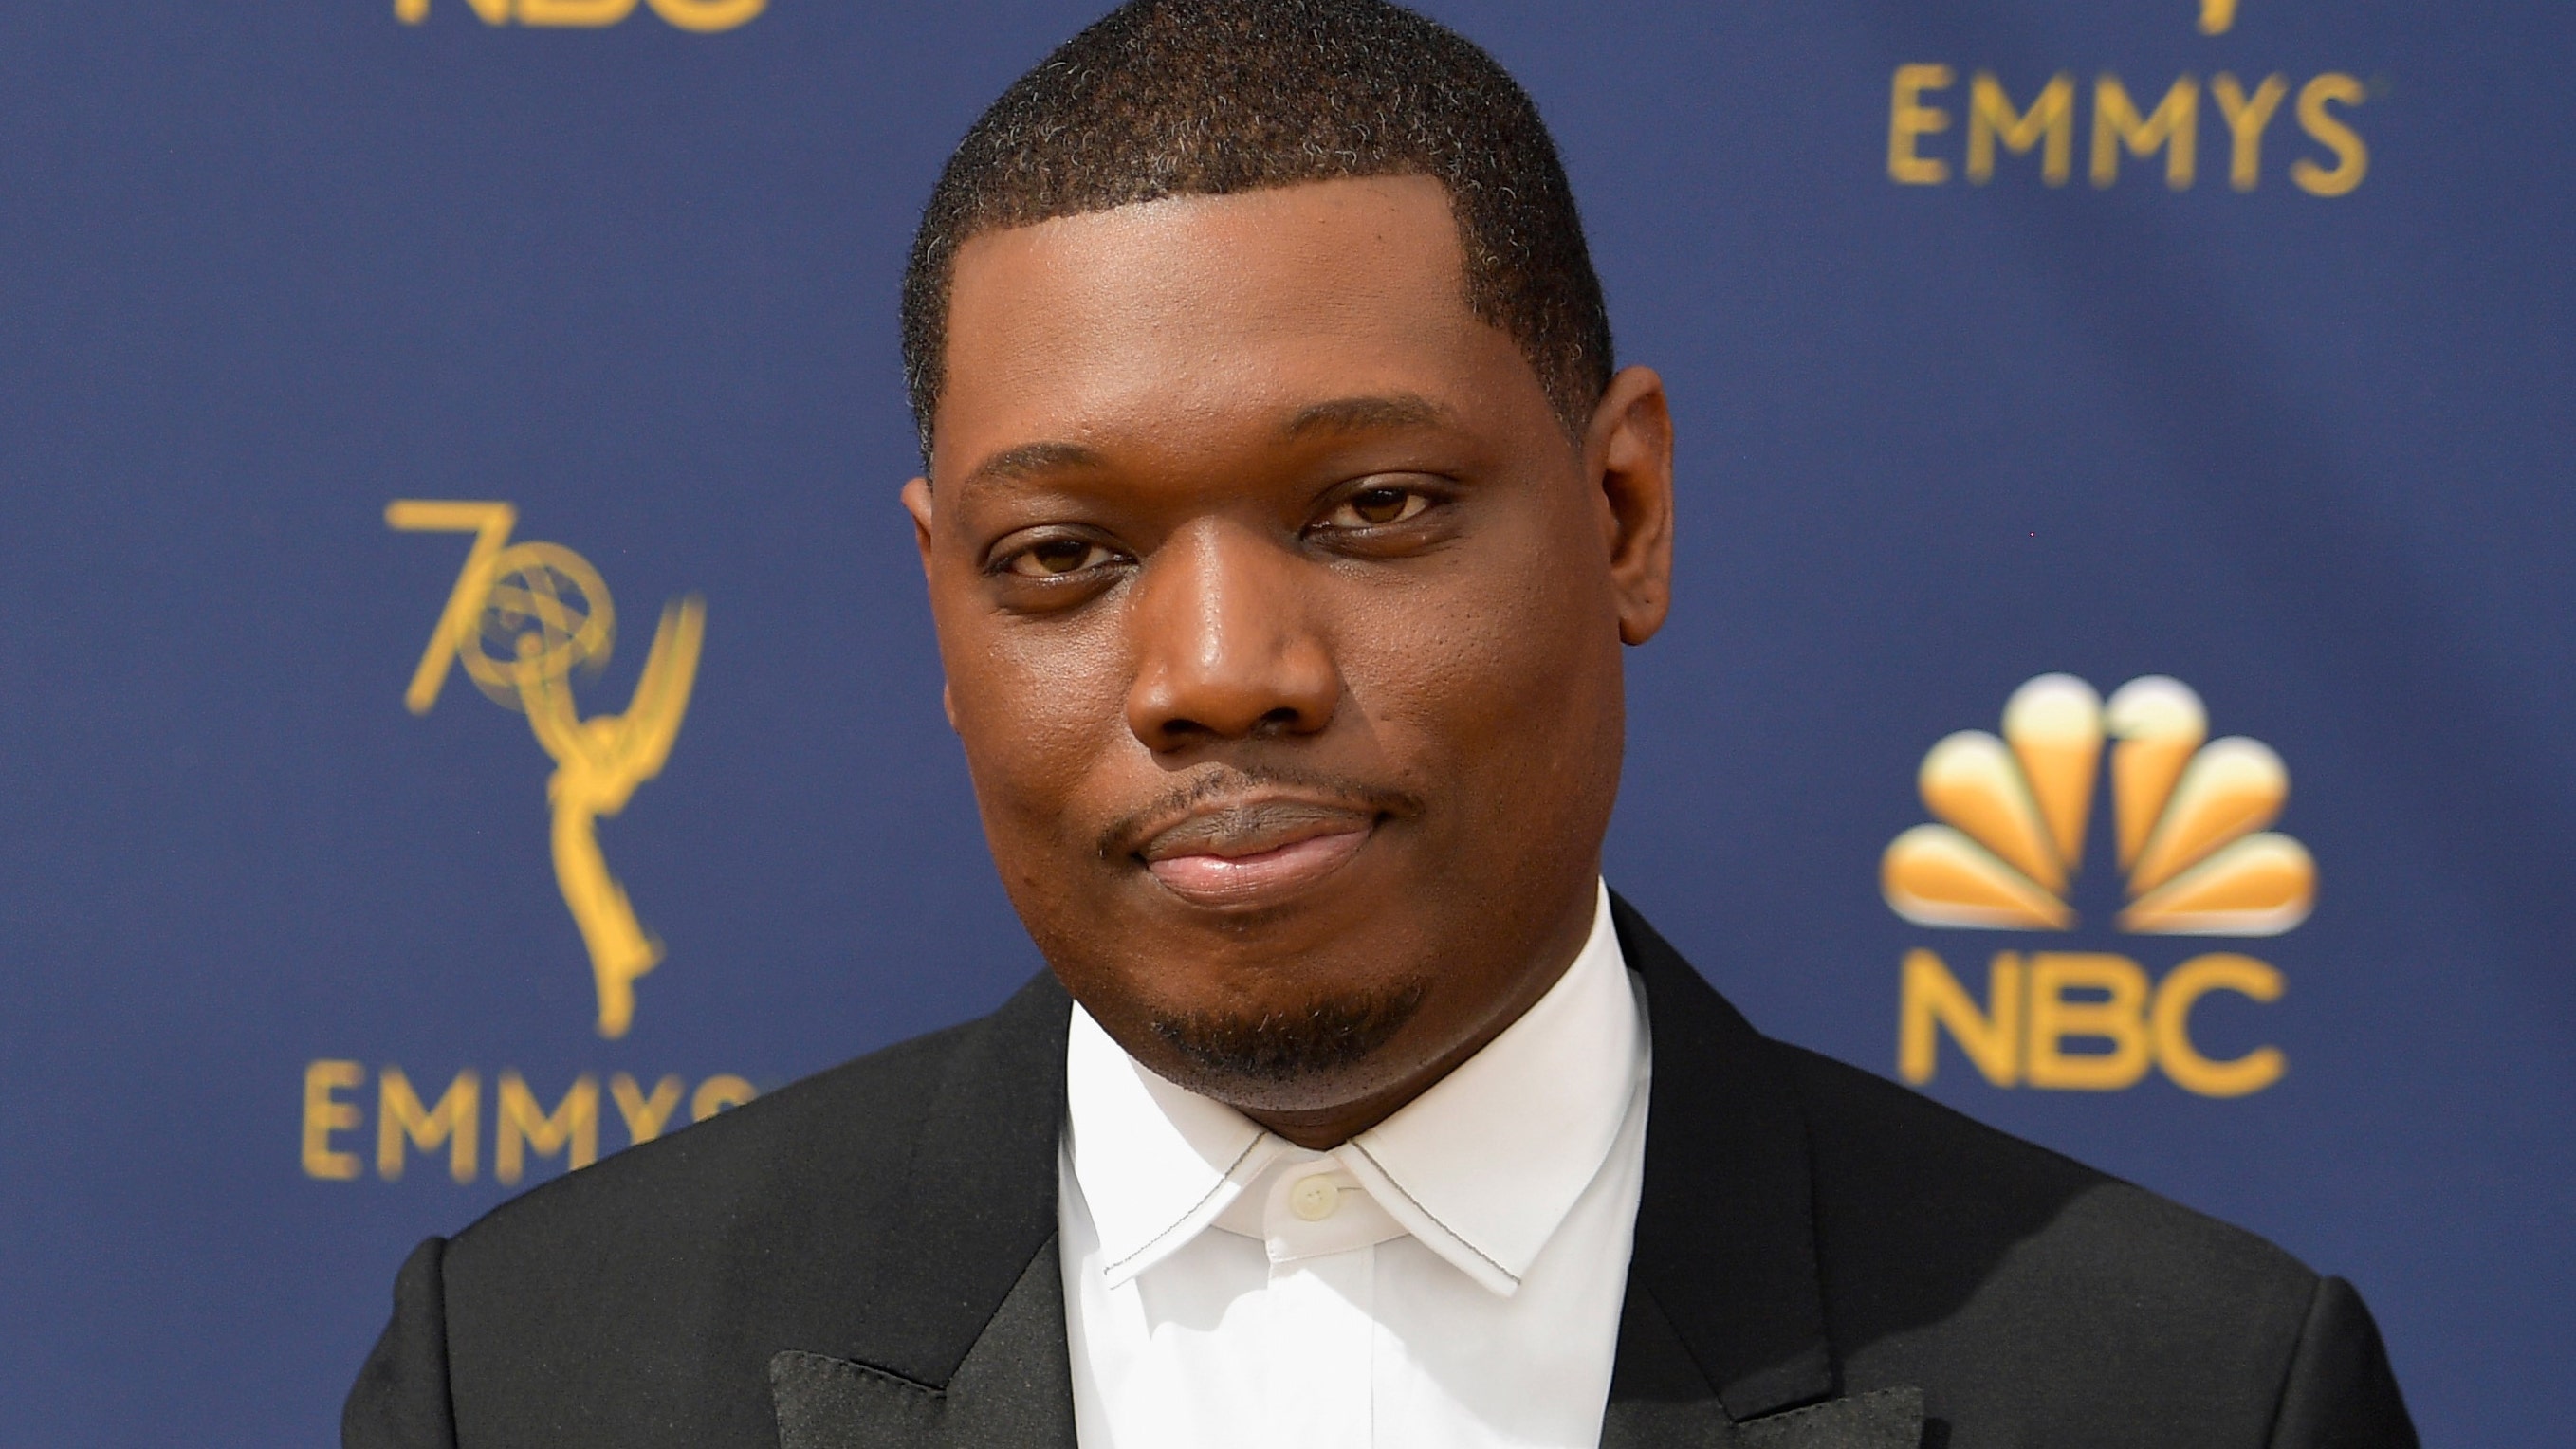 'SNL's' Michael Che, NBC accused of 'antisemitic trope' in 'Weekend